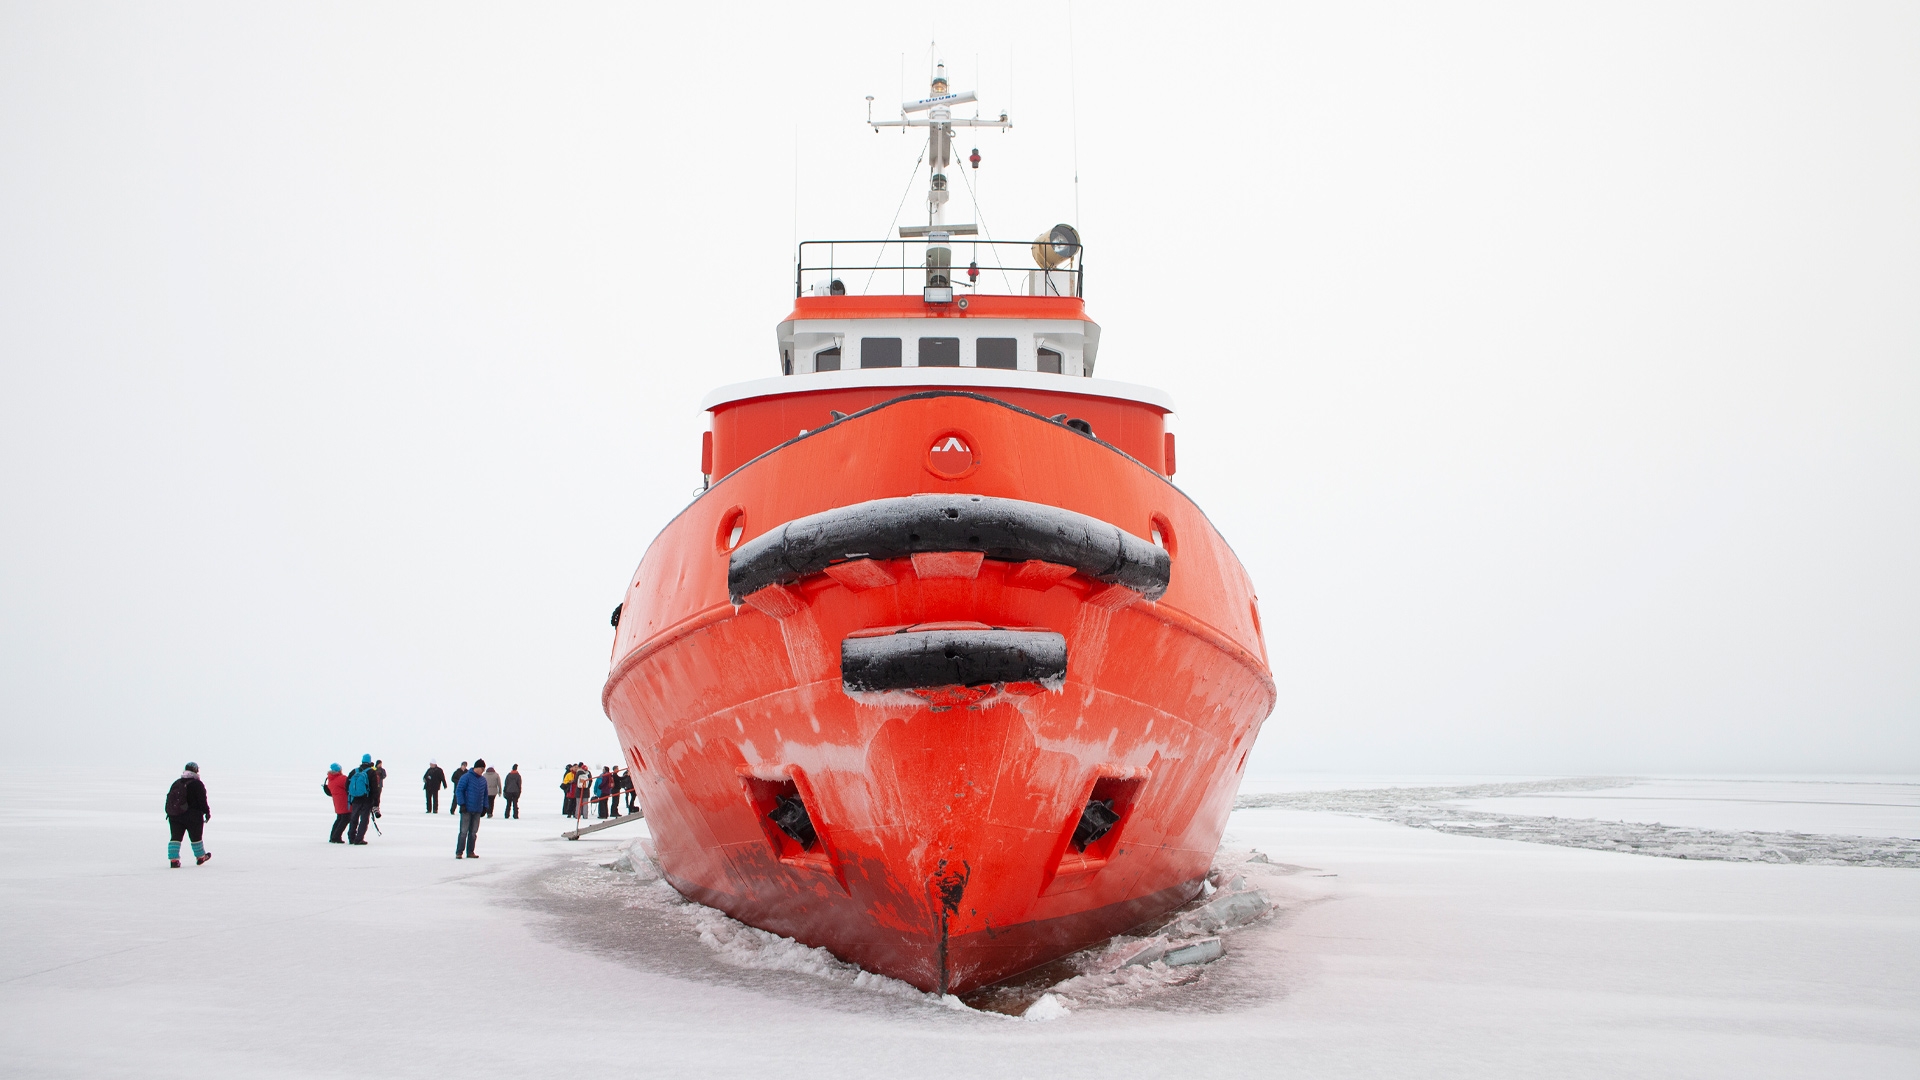 Icebreaker ships are helping Lapland to become a year-round destination